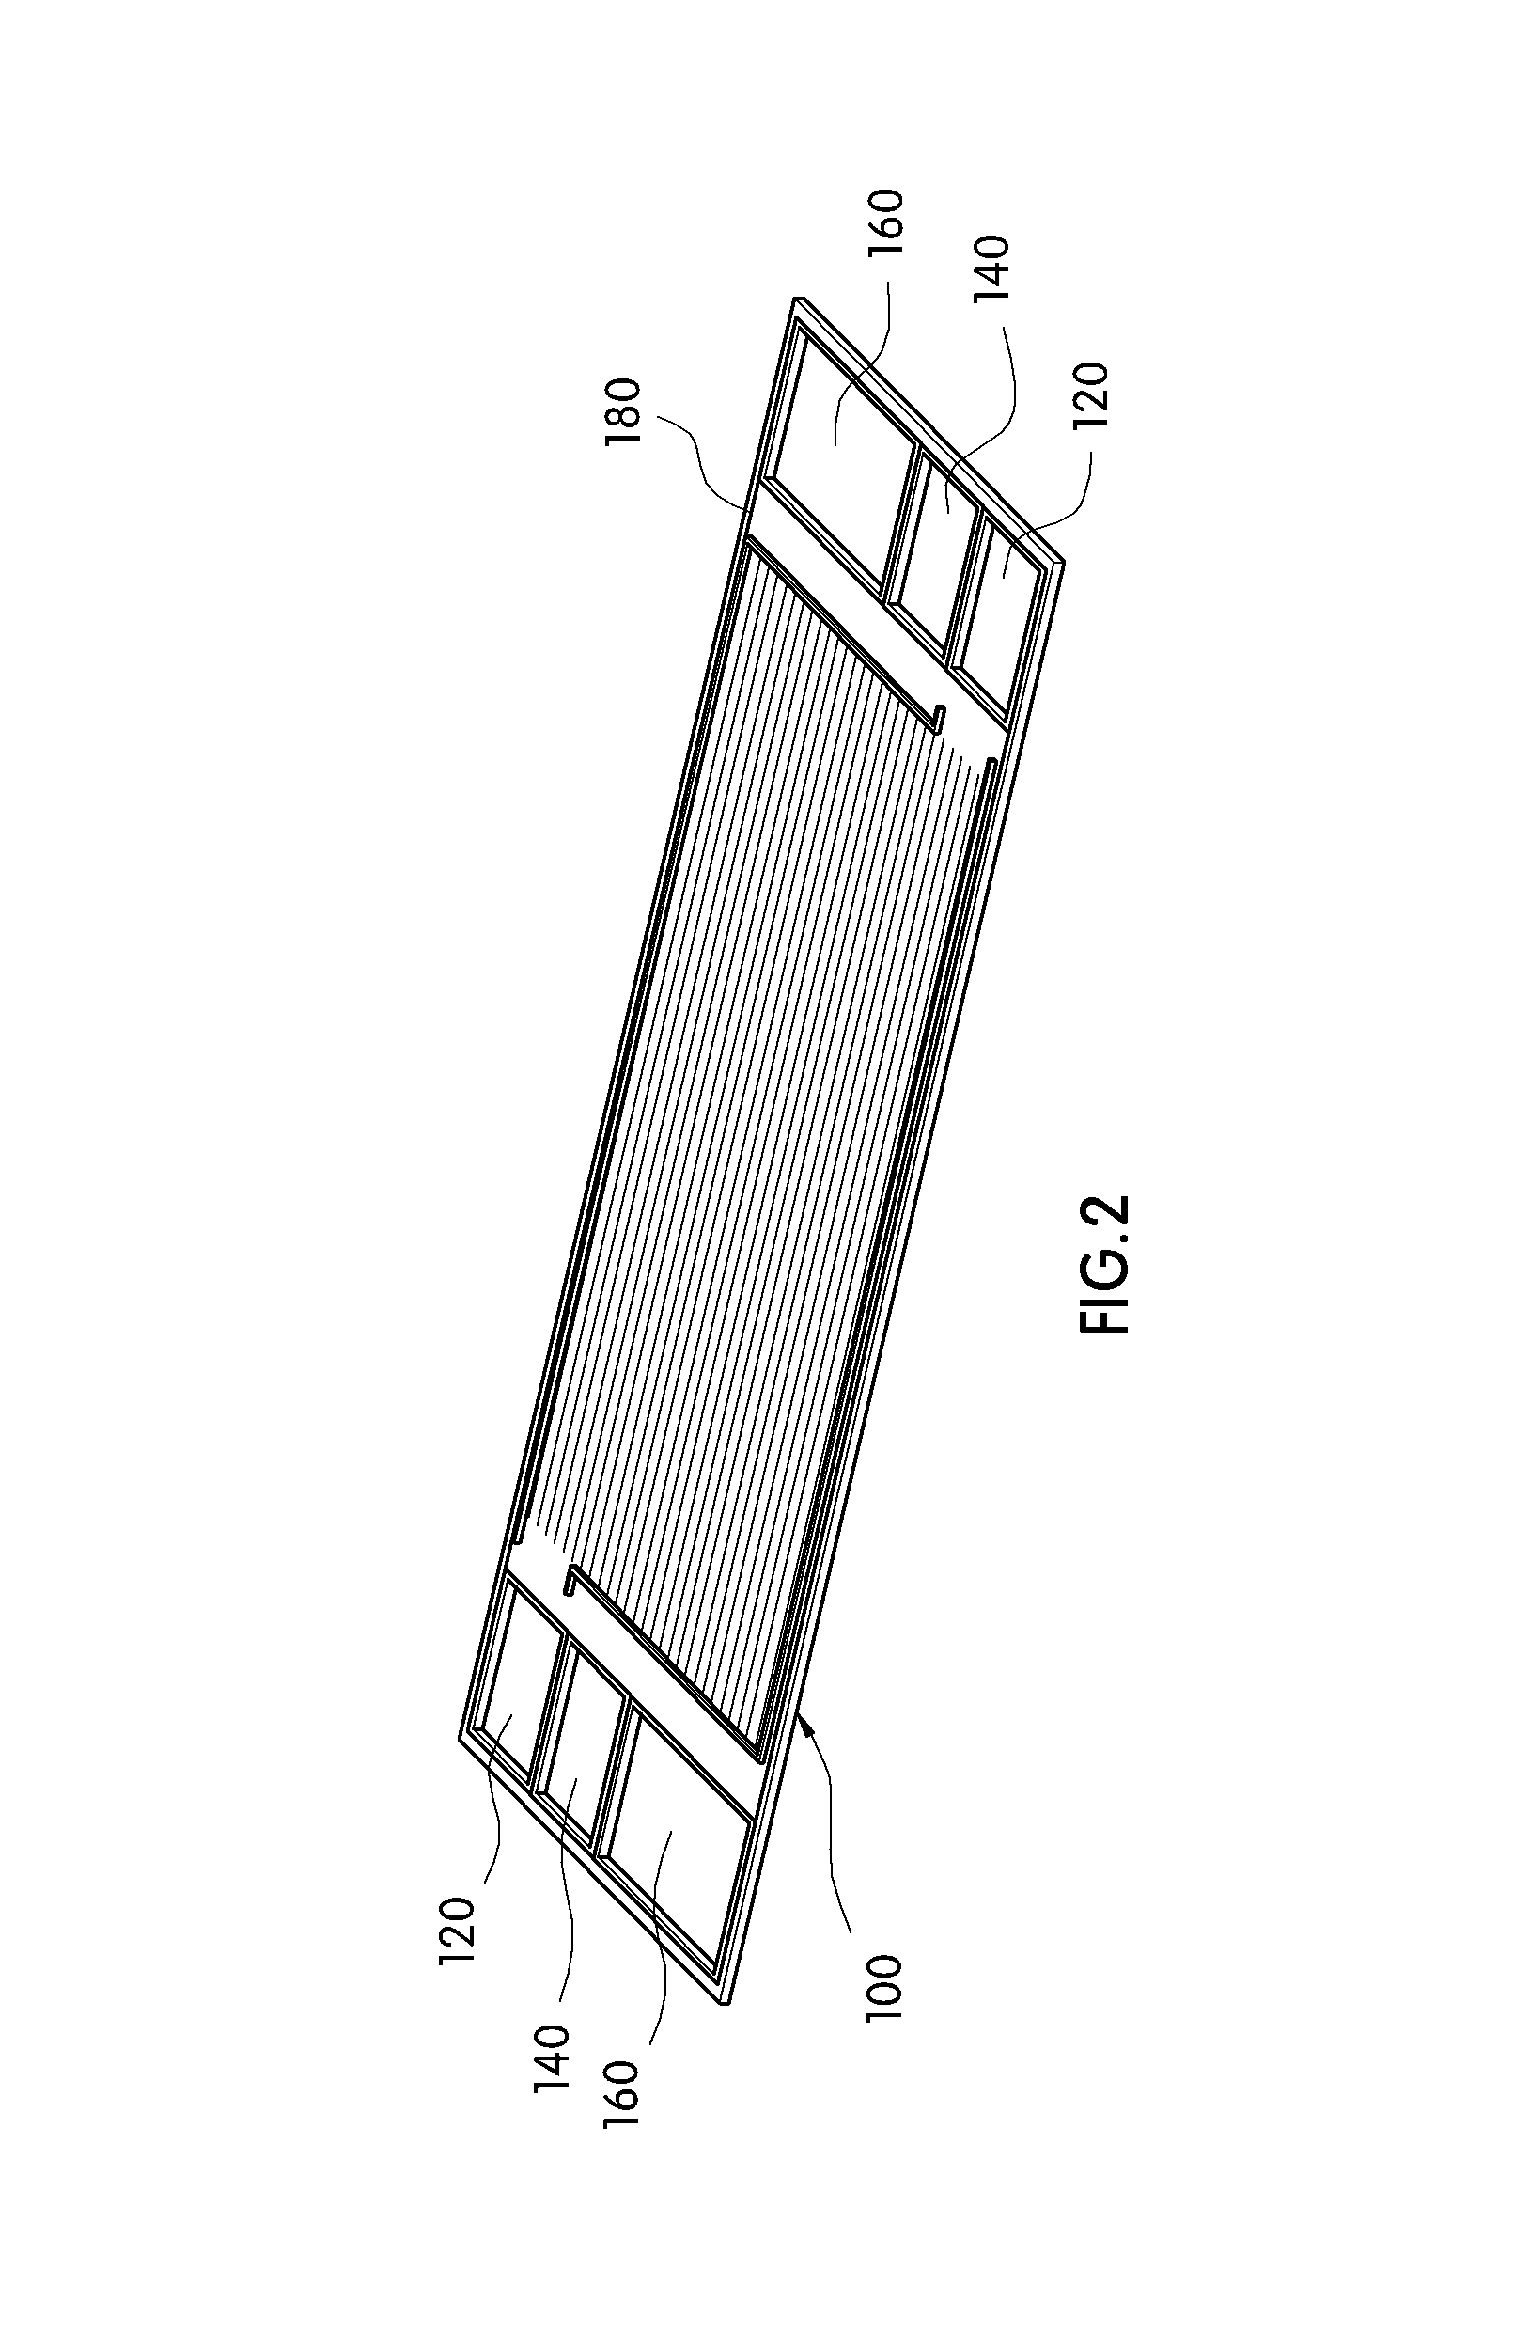 Fuel cell stack with water drainage structure